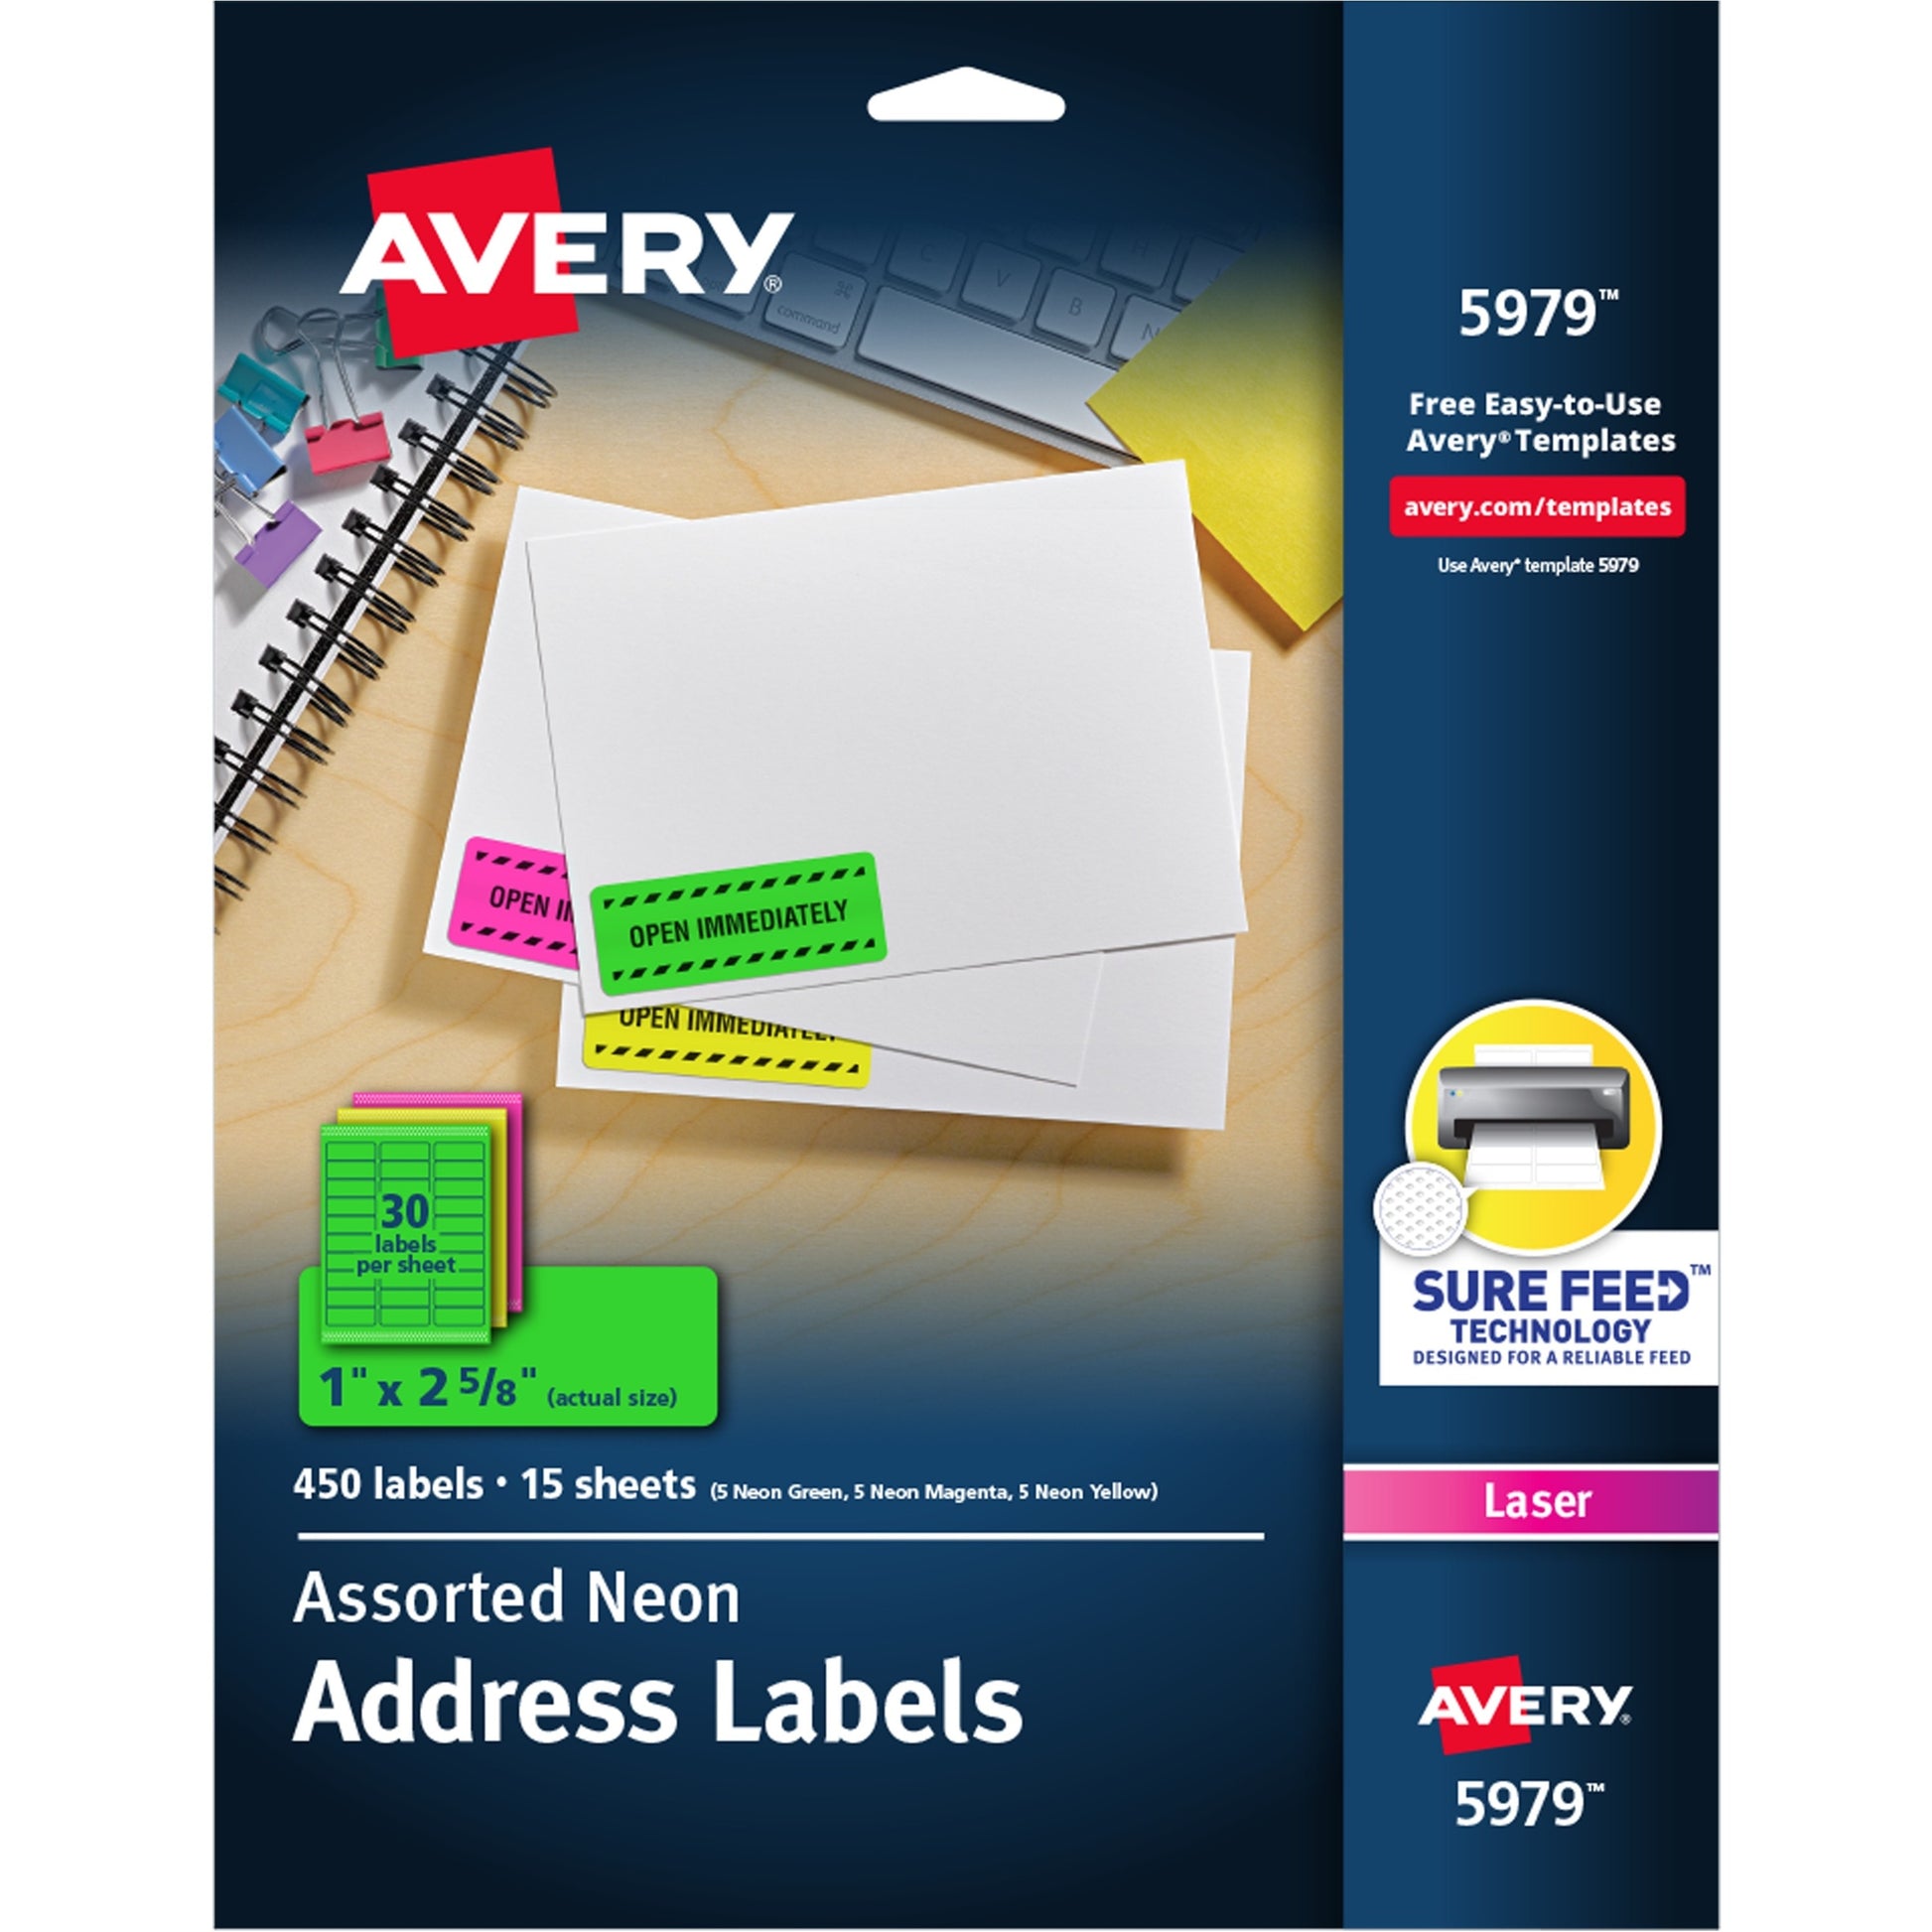 Avery&reg; Neon Address Labels with Sure Feed(TM) for Laser Printers, 1 x 2 5/8" , Assorted Colors, 450 Labels (5979)